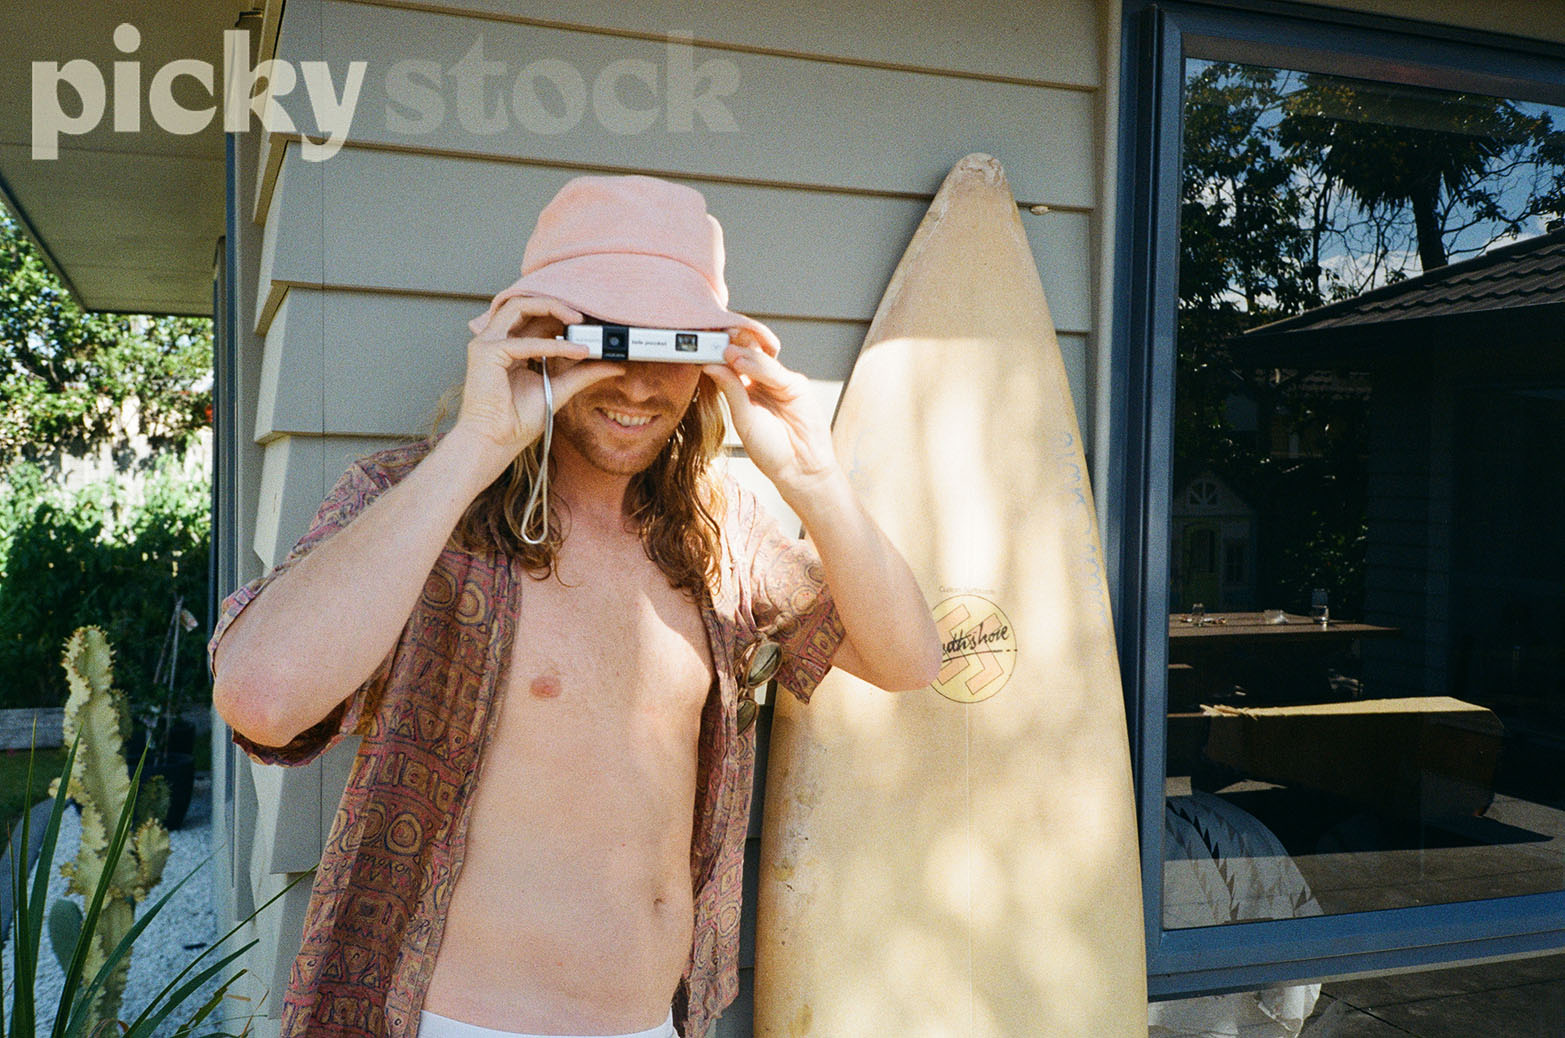 Man wearing a pink bucket hat holding a small film camera, taking a photo, eyes to camera. Man is wearing a patterned casual shirt with the buttons undone with bare chest underneath. Behind him is house, looks like a holiday home with a yellow surf board standing up to the right of him. 